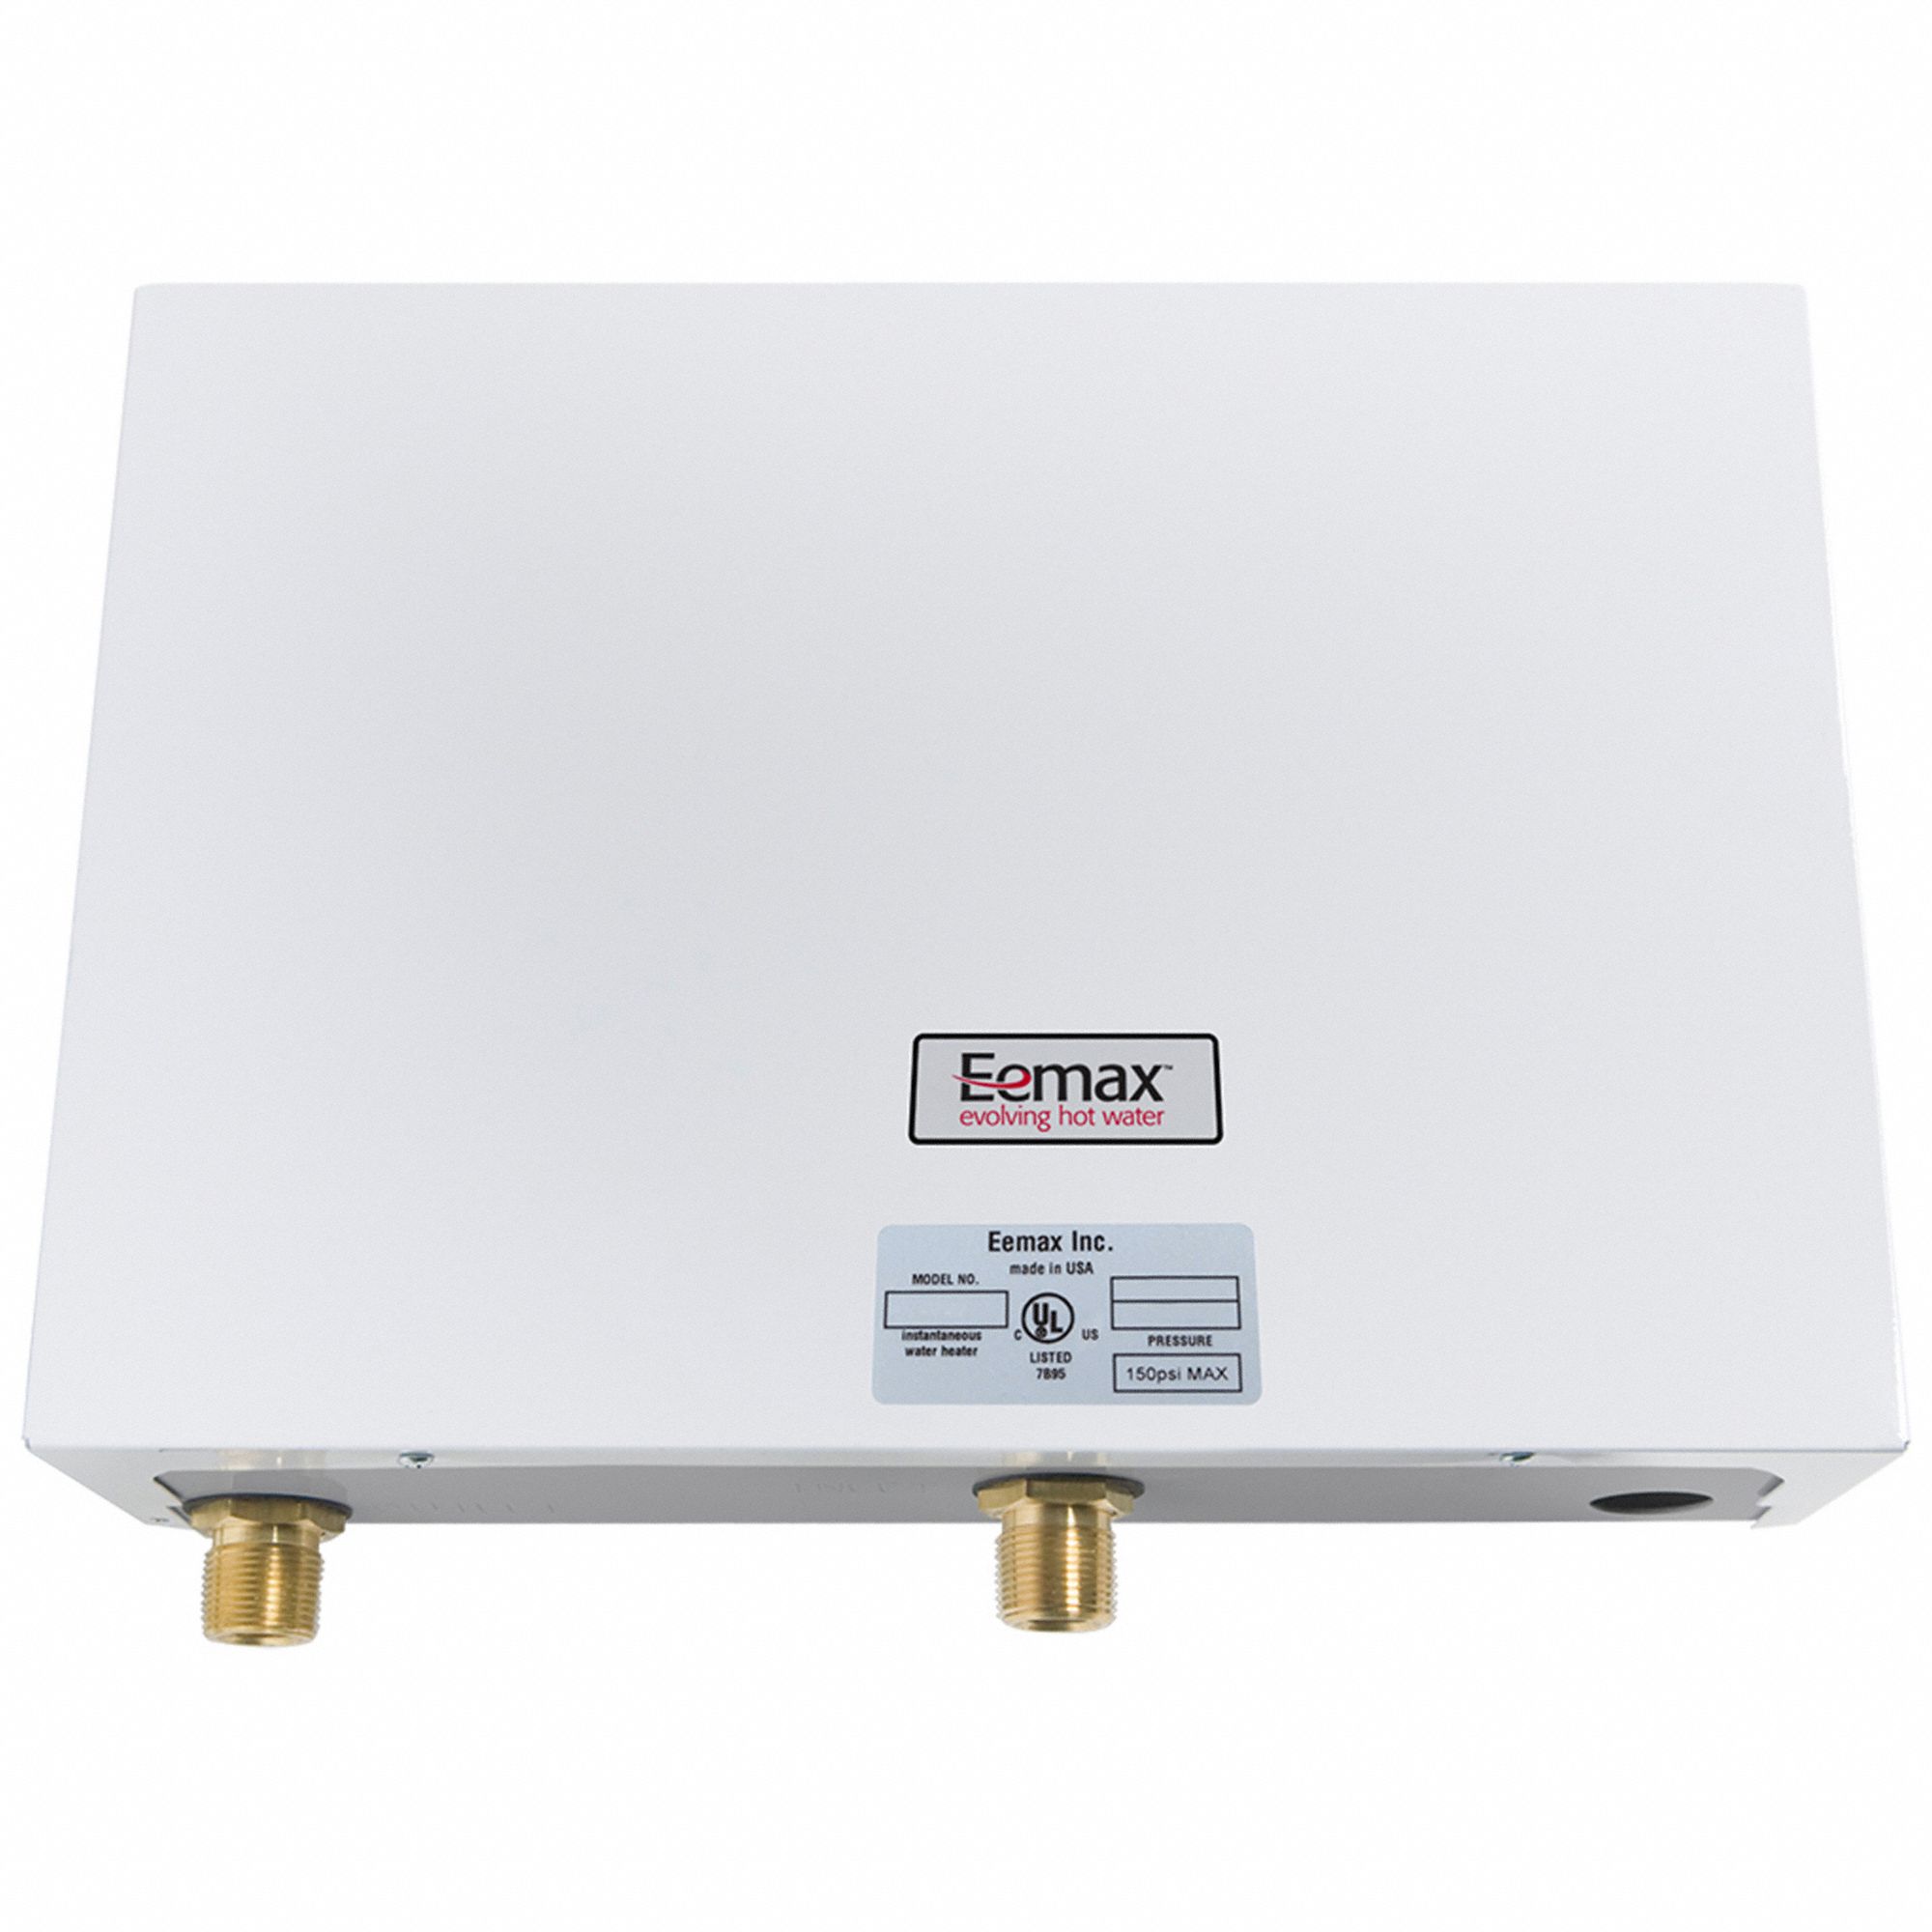 EEMAX EX180T2T Electric Tankless Water Heater208V